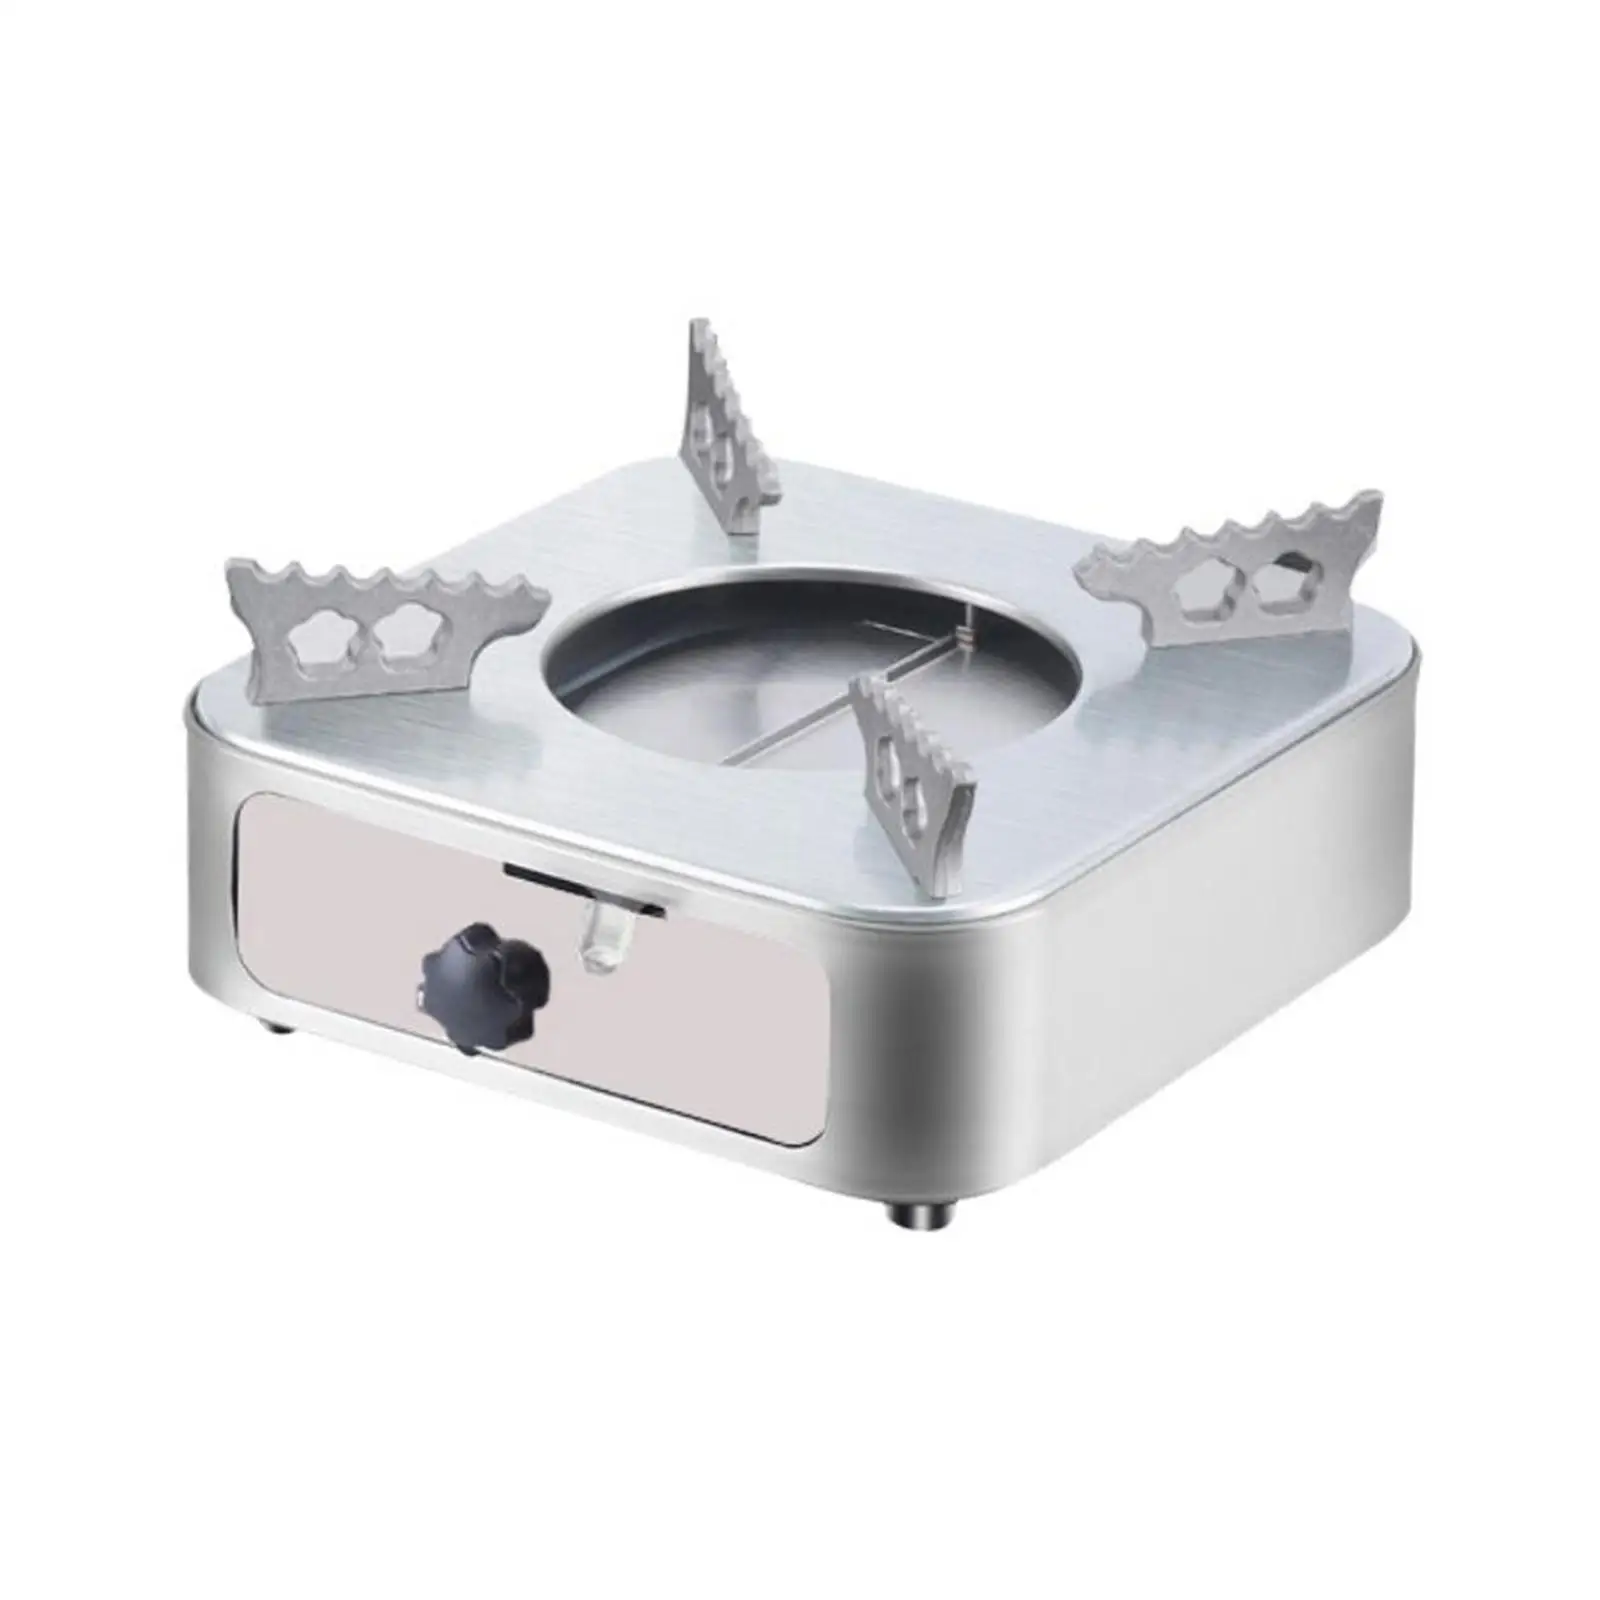 Compact Alcohol Stove Lightweight Sturdy Furnace Burner with Aluminium Stand Spirit Burner for BBQ Cooking Camping Backpacking